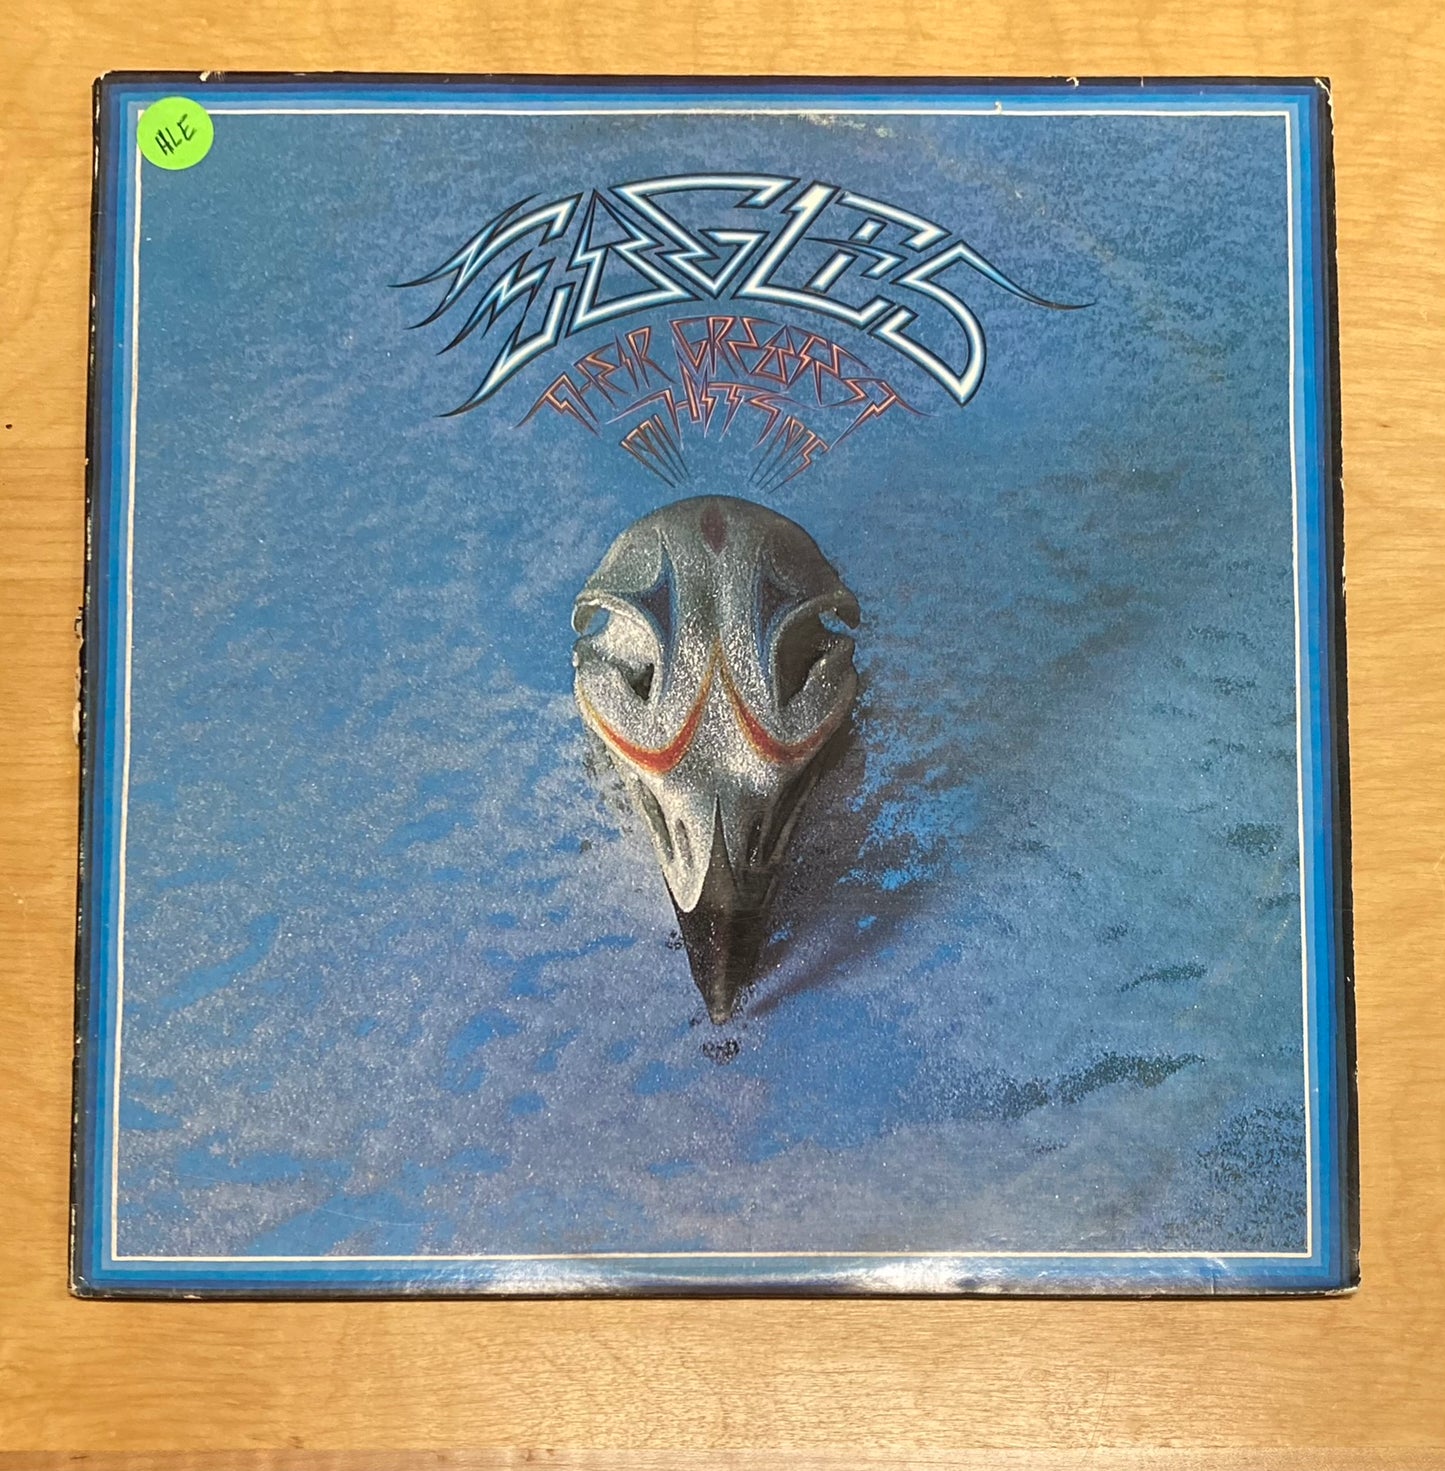 The Greatest Hits 1971-1975 - Eagles